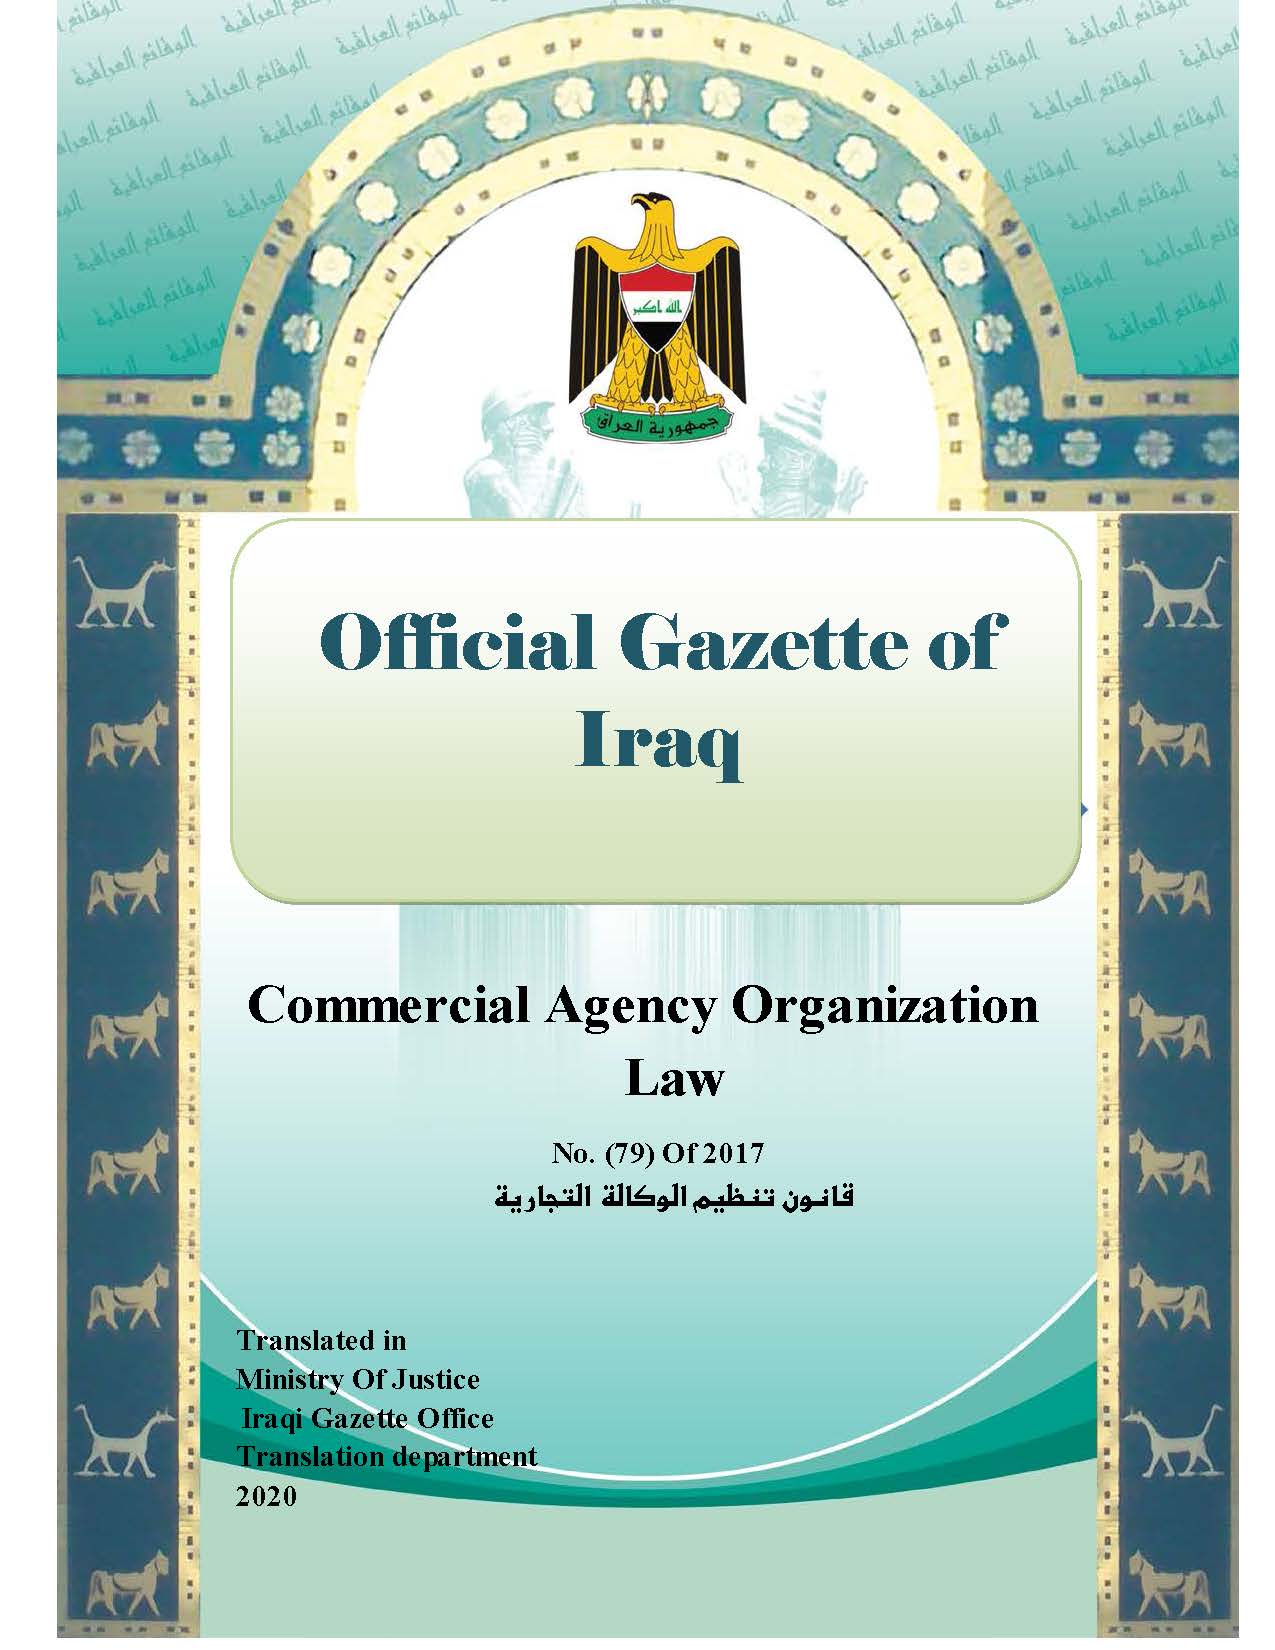 Commercial Agency Organization Law No (79) of 2017